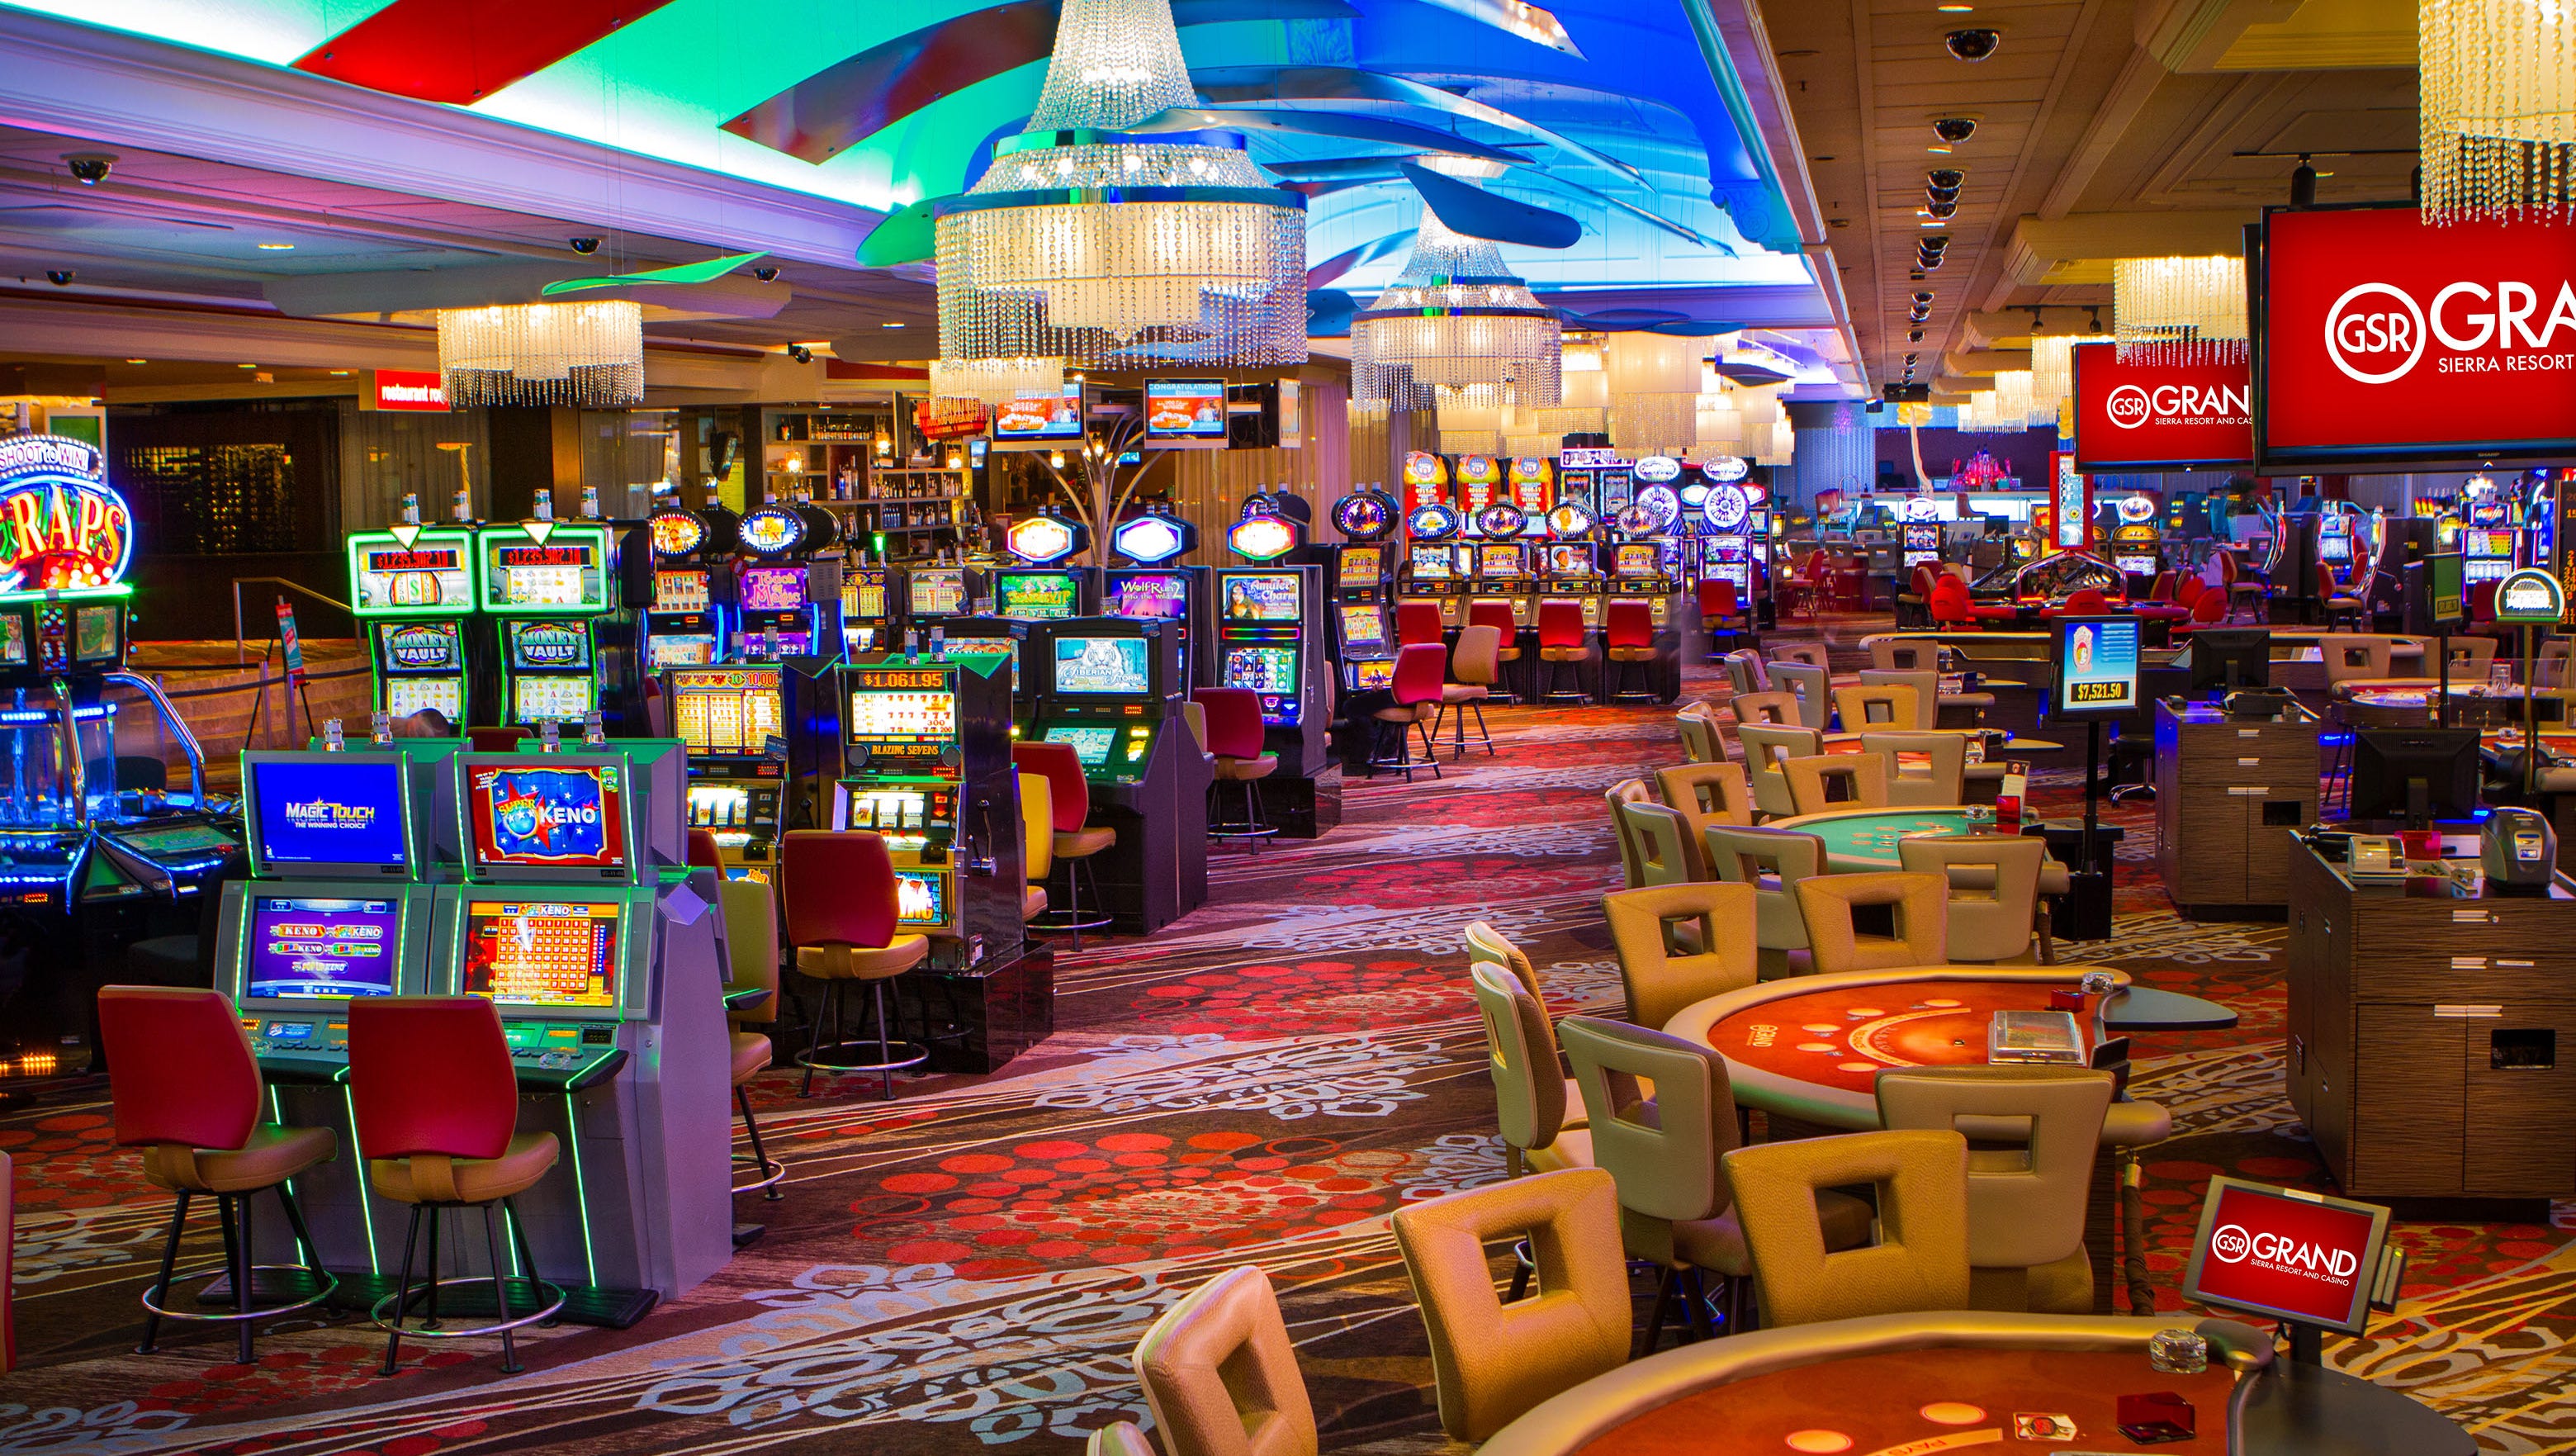 Reno Hotels Grand Sierra Resort Fined For Covid Violations